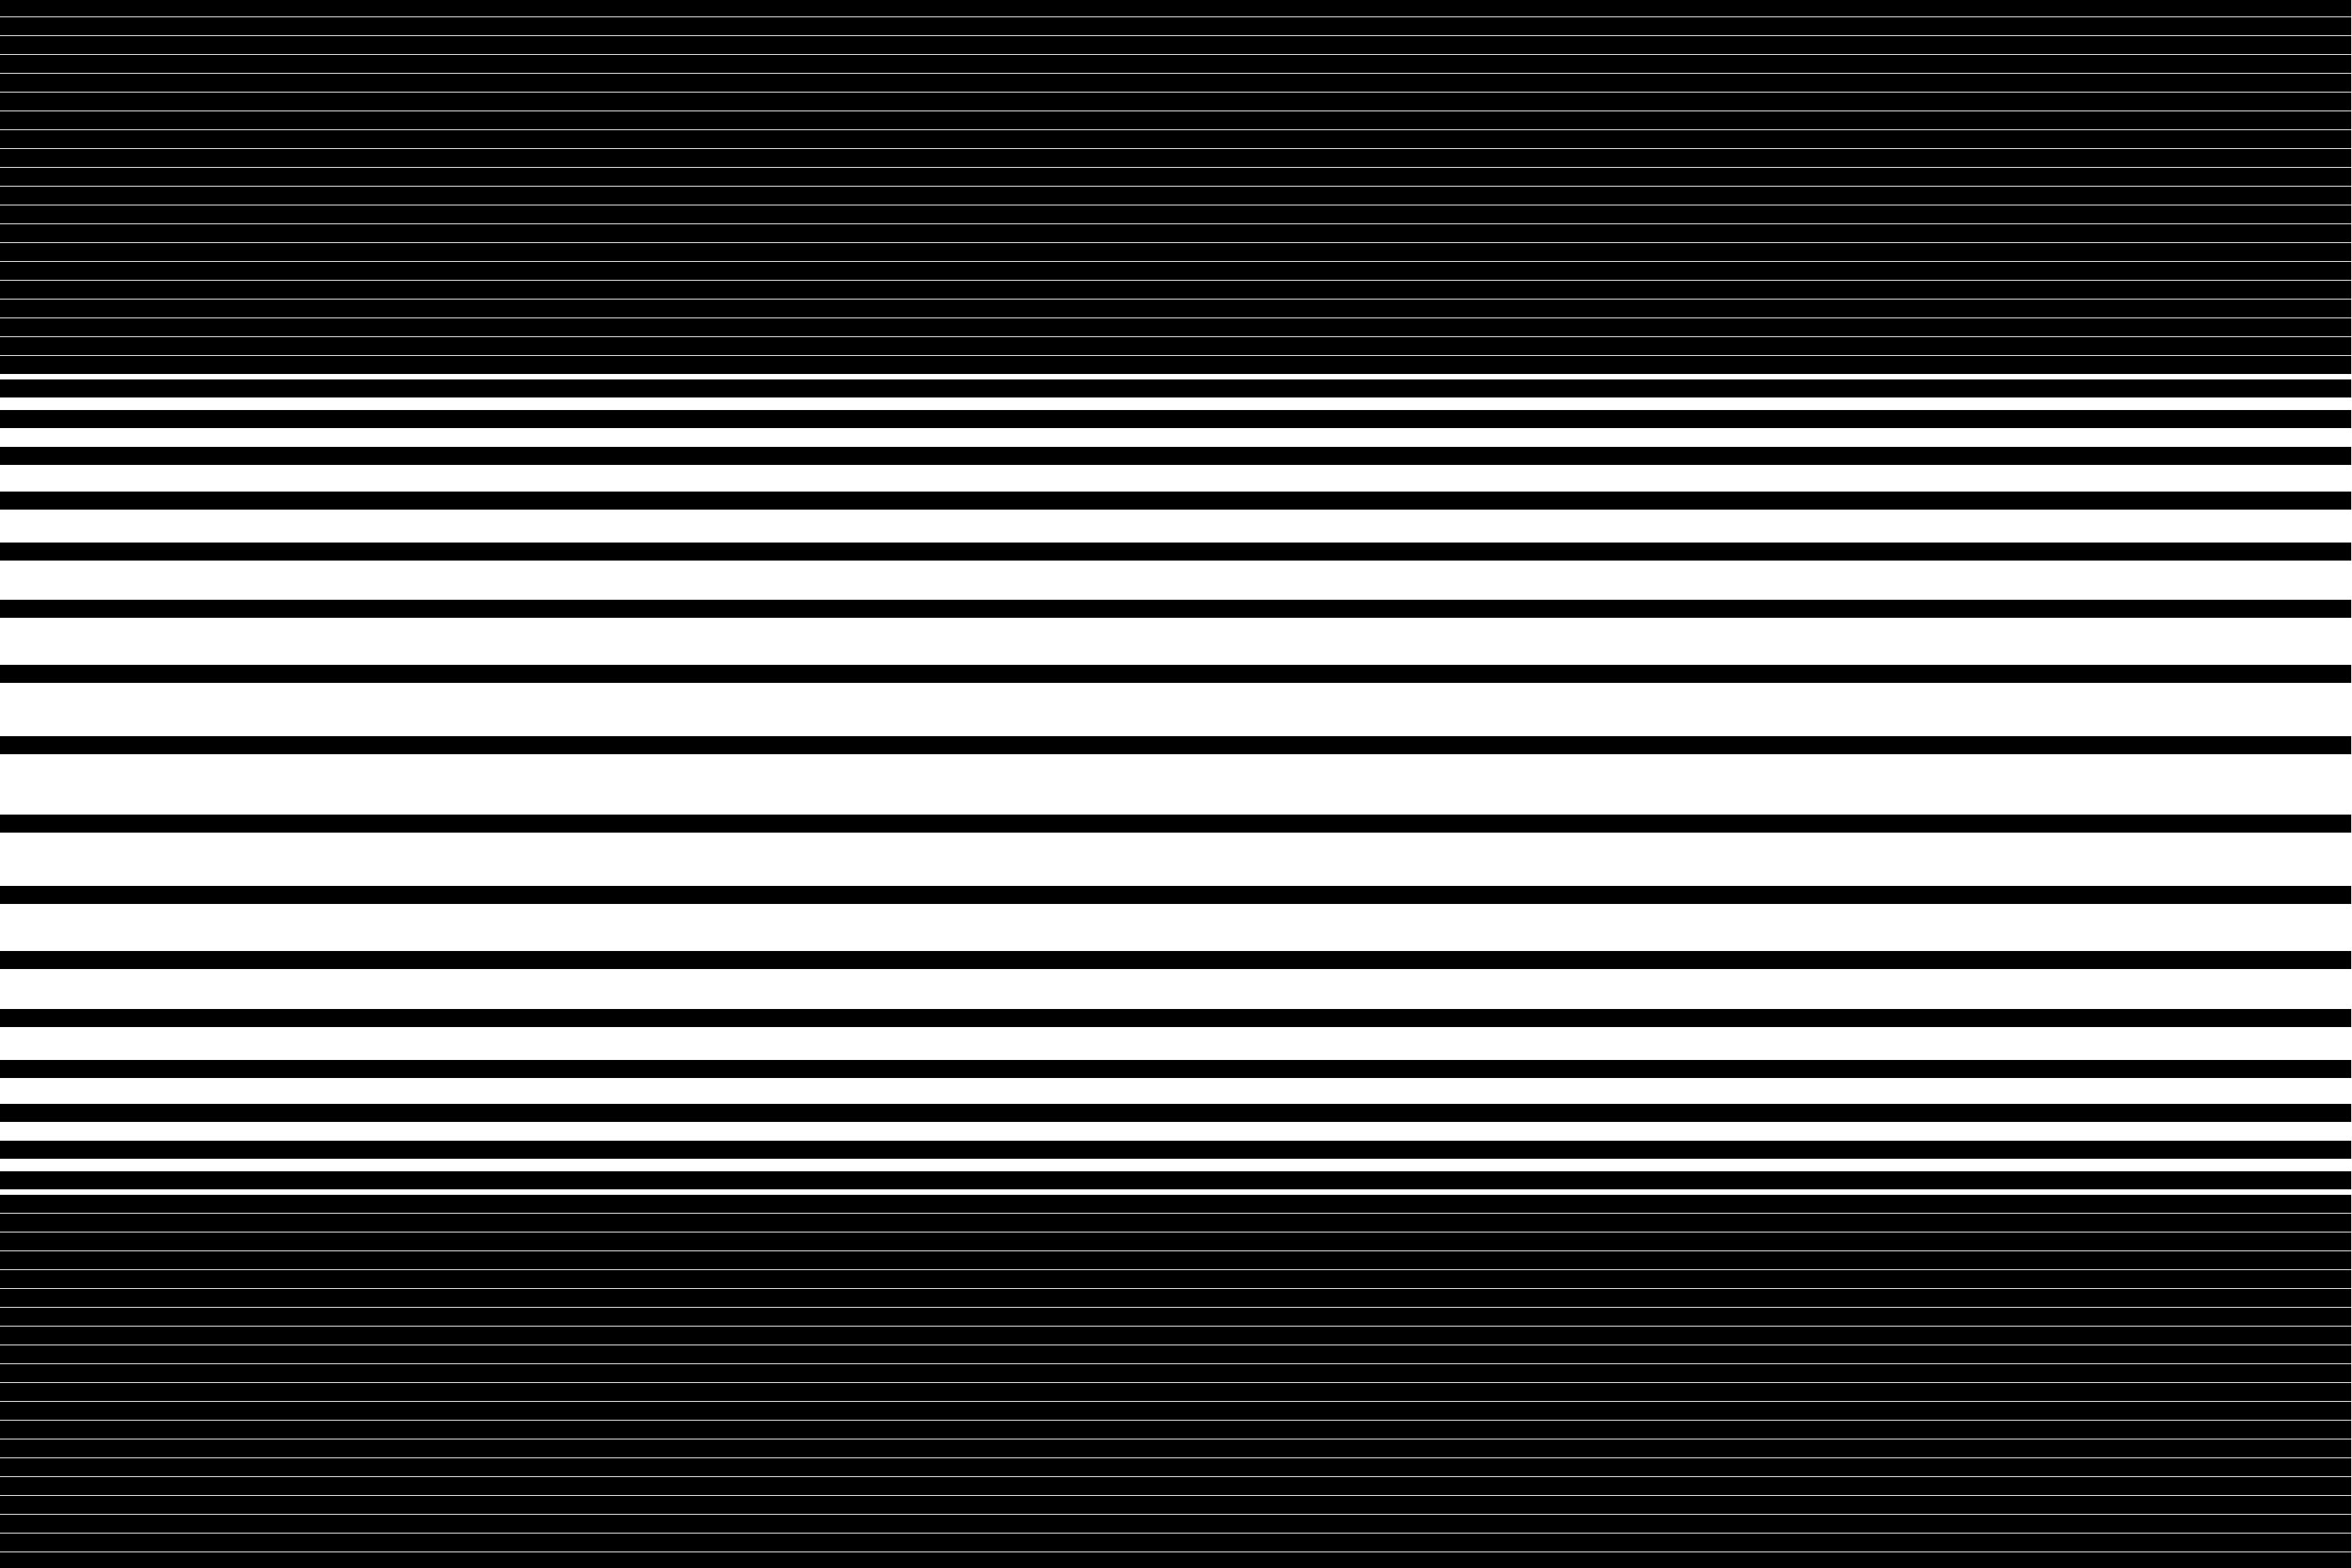 Black and White Lines Wallpapers - Top Free Black and White Lines ...